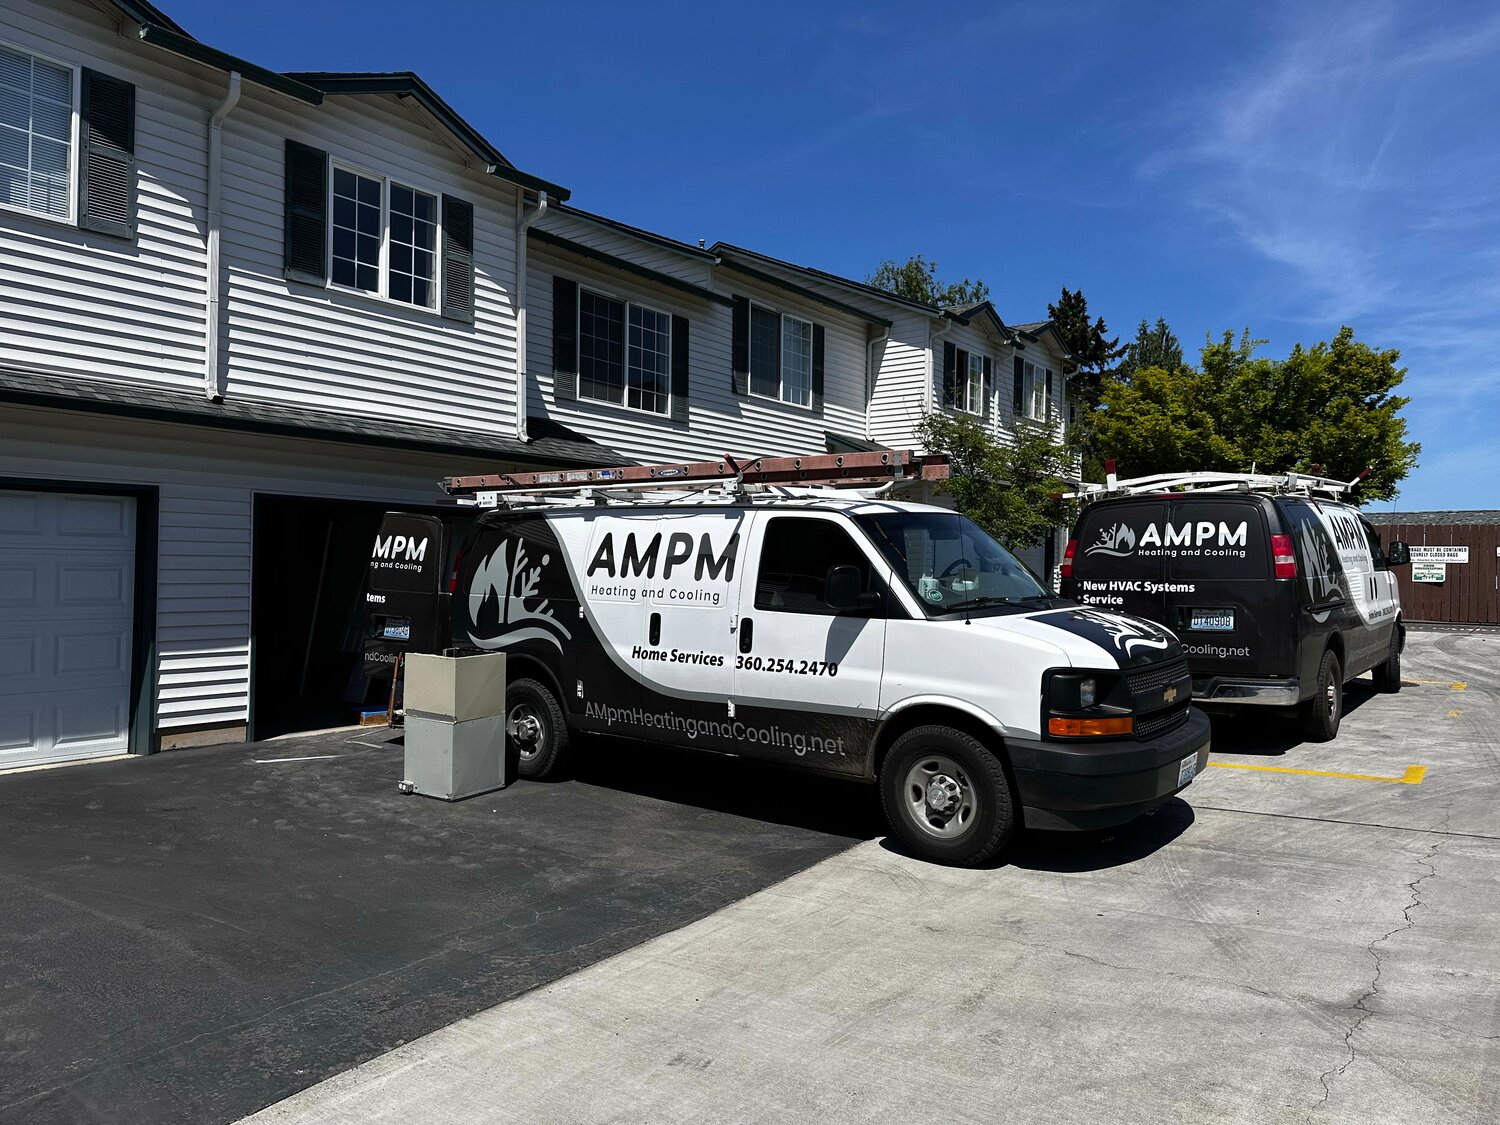 AMPM Heating and Cooling is seen at a home for a service visit.